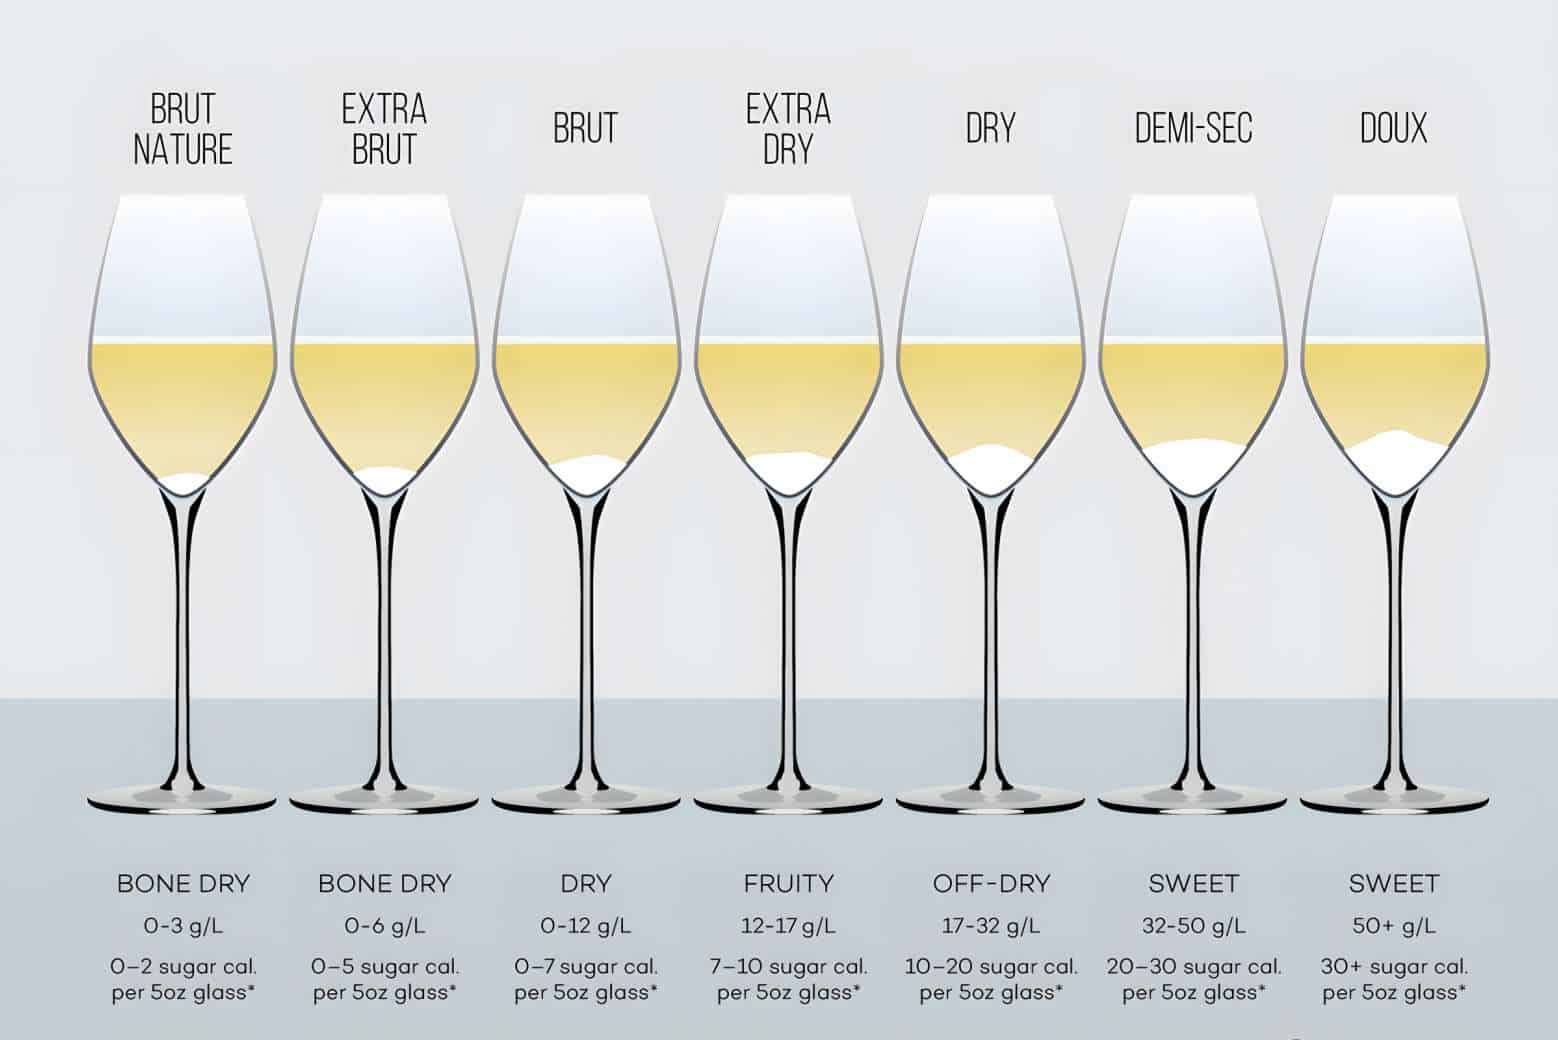 The-Sugar-Content-of-White-Wine-and-Its-Calorie-Count